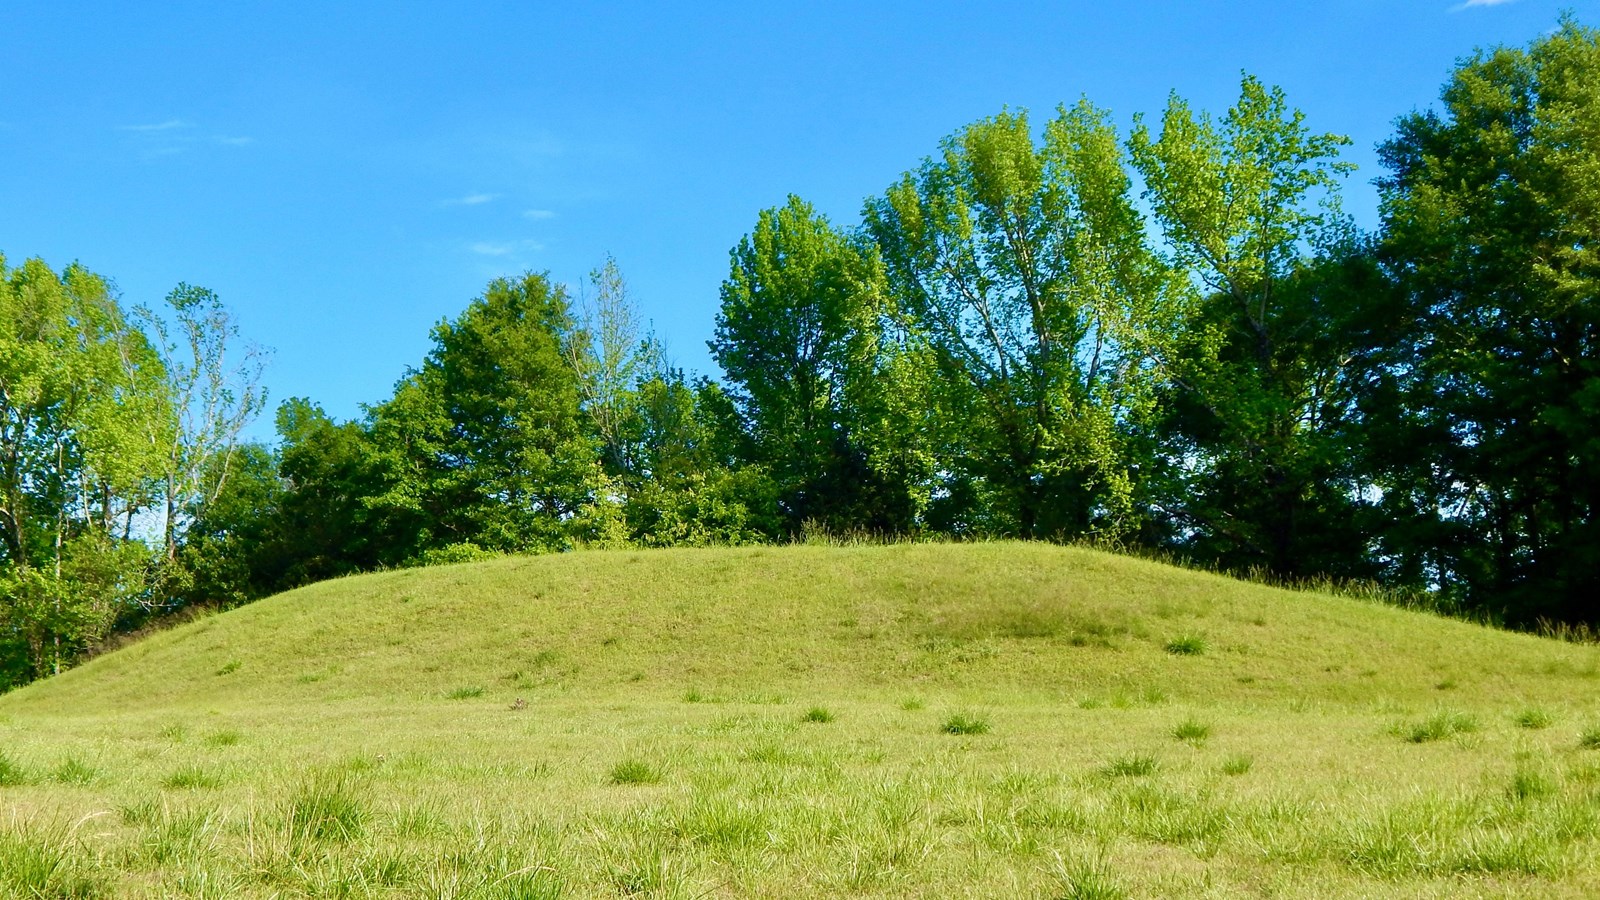 A grassy mound with trees behind it. 